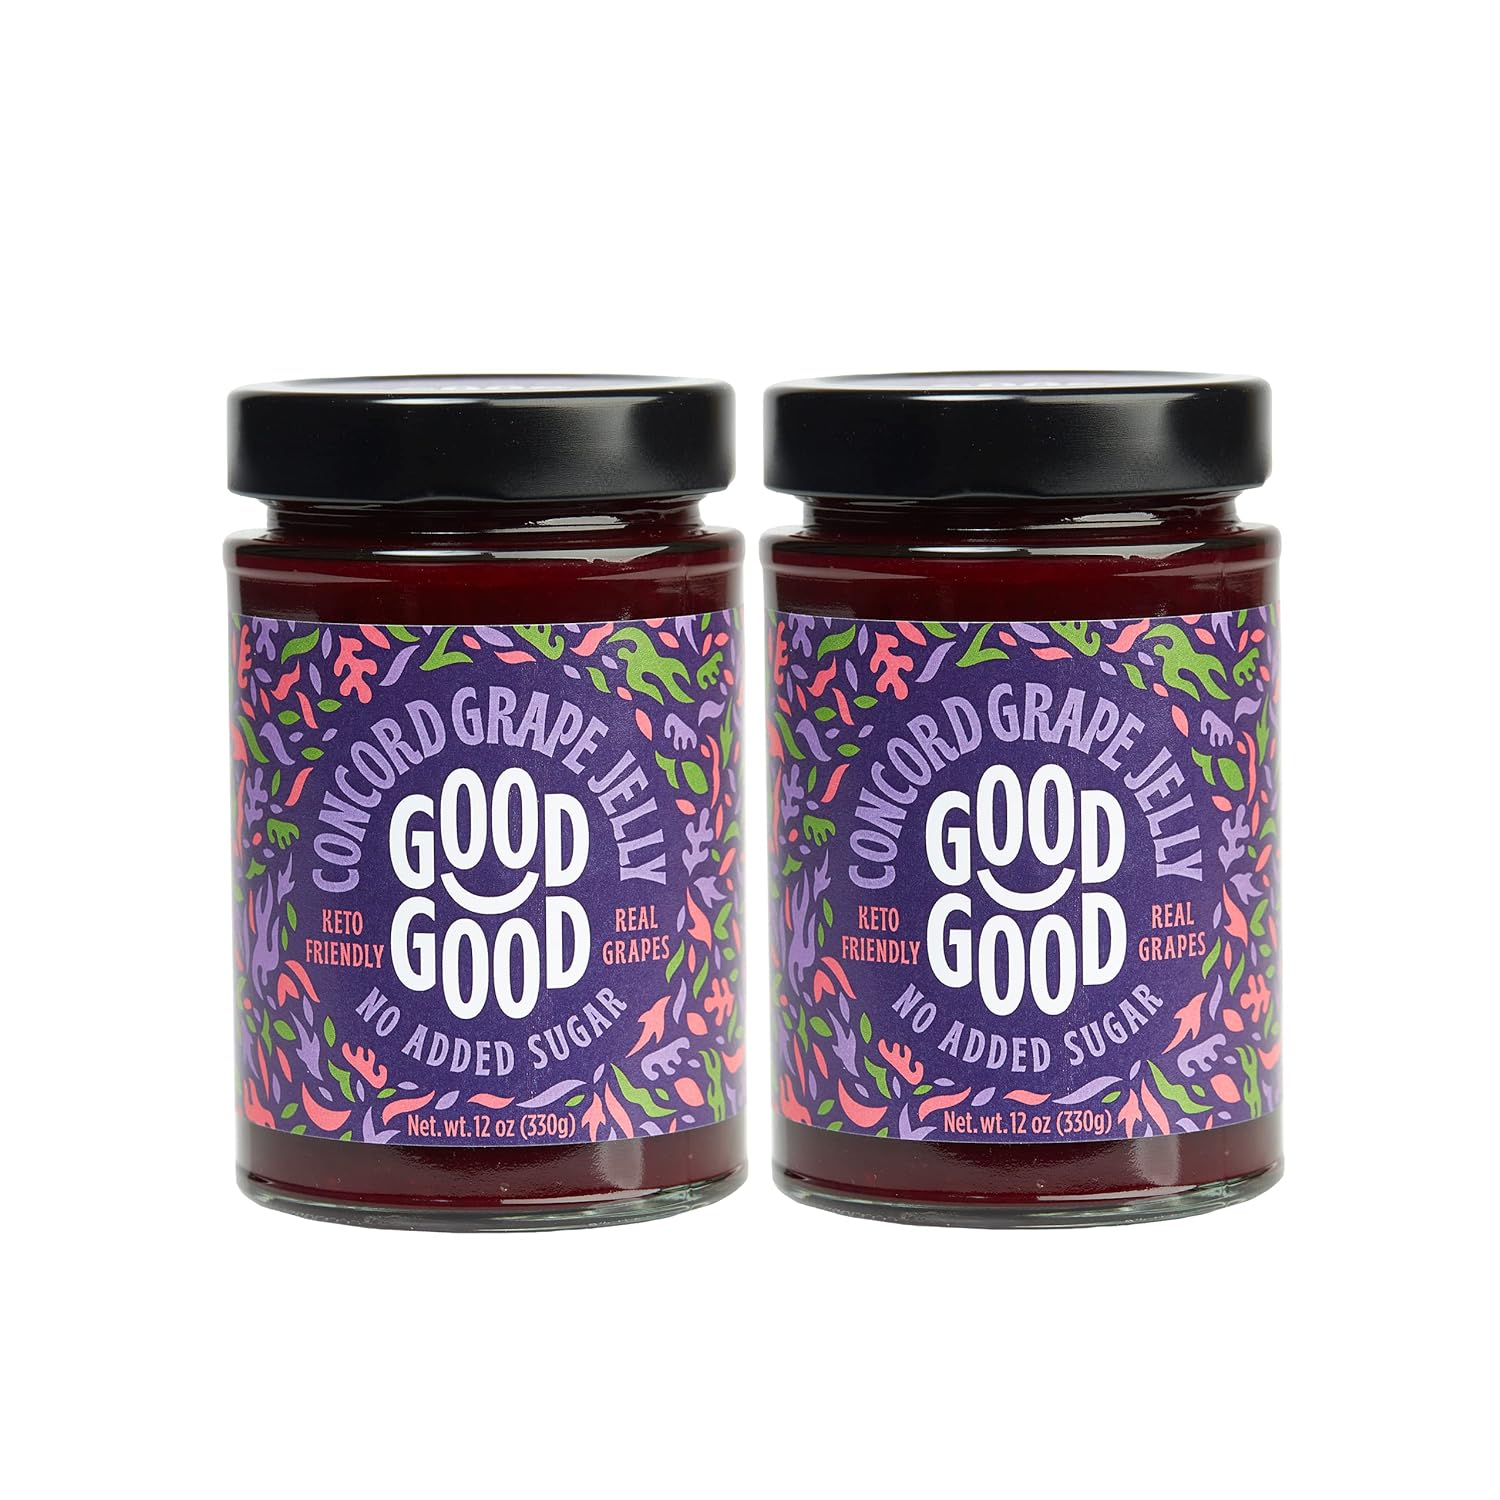 GOOD GOOD No Added Sugar Concord Grape Jelly - Keto Friendly Jelly- Low Carb, Low-Calorie and Vegan - Diabetic Friendly - 12oz / 330g (Pack of 2)